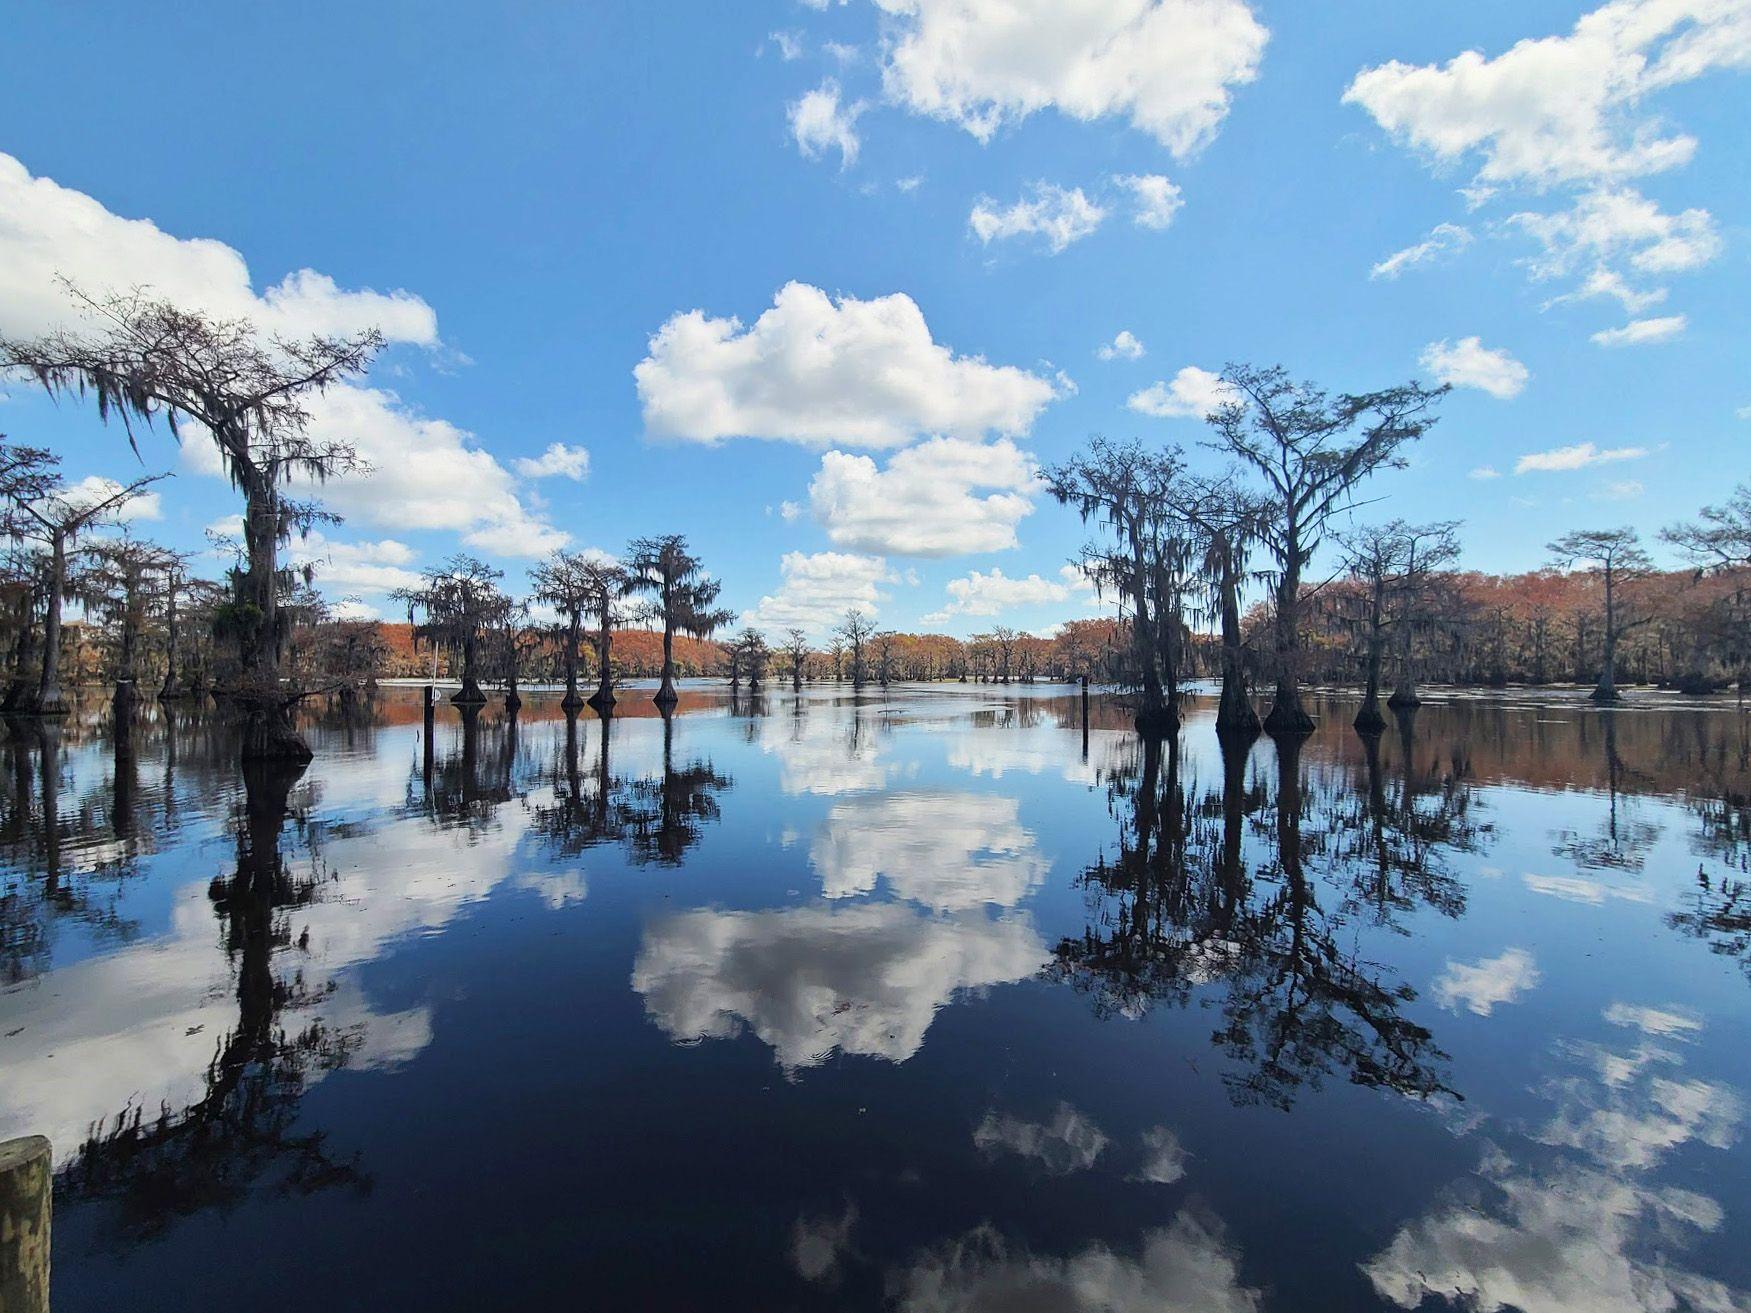 Caddo Lake with a relection of a blue sky and clouds on the water. Several trees are scattered across the lake.